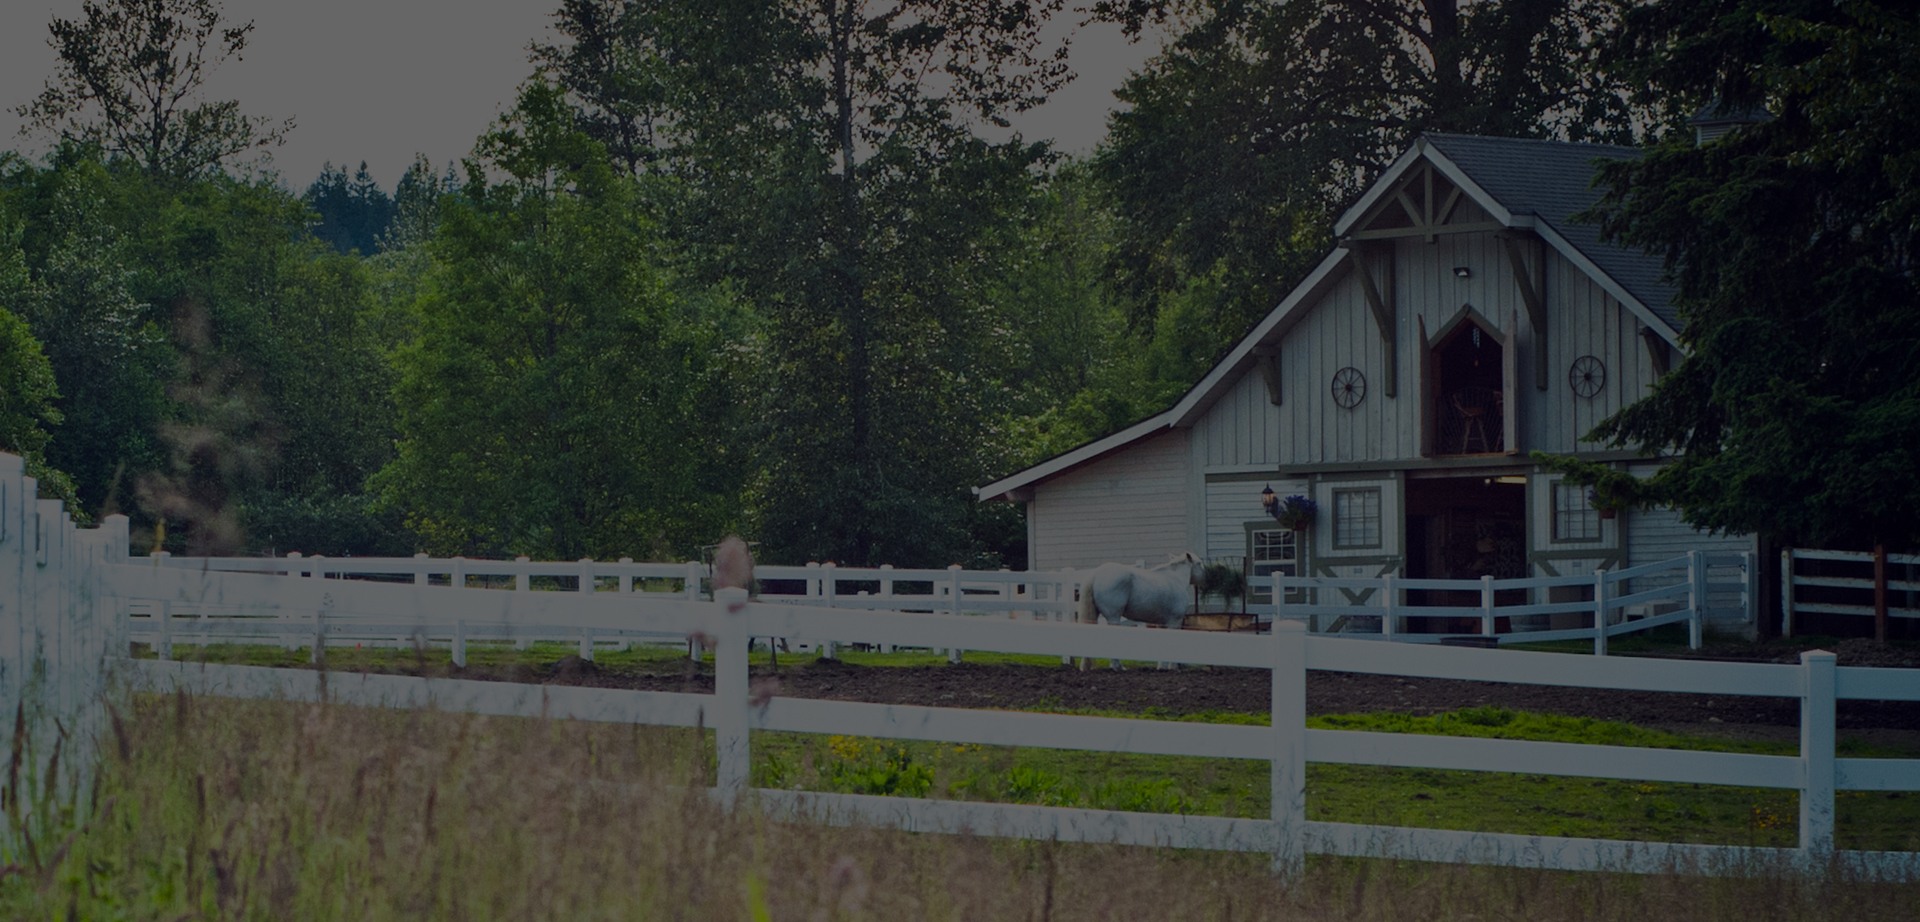 DC Builders can build you the perfect wedding barn for your property.